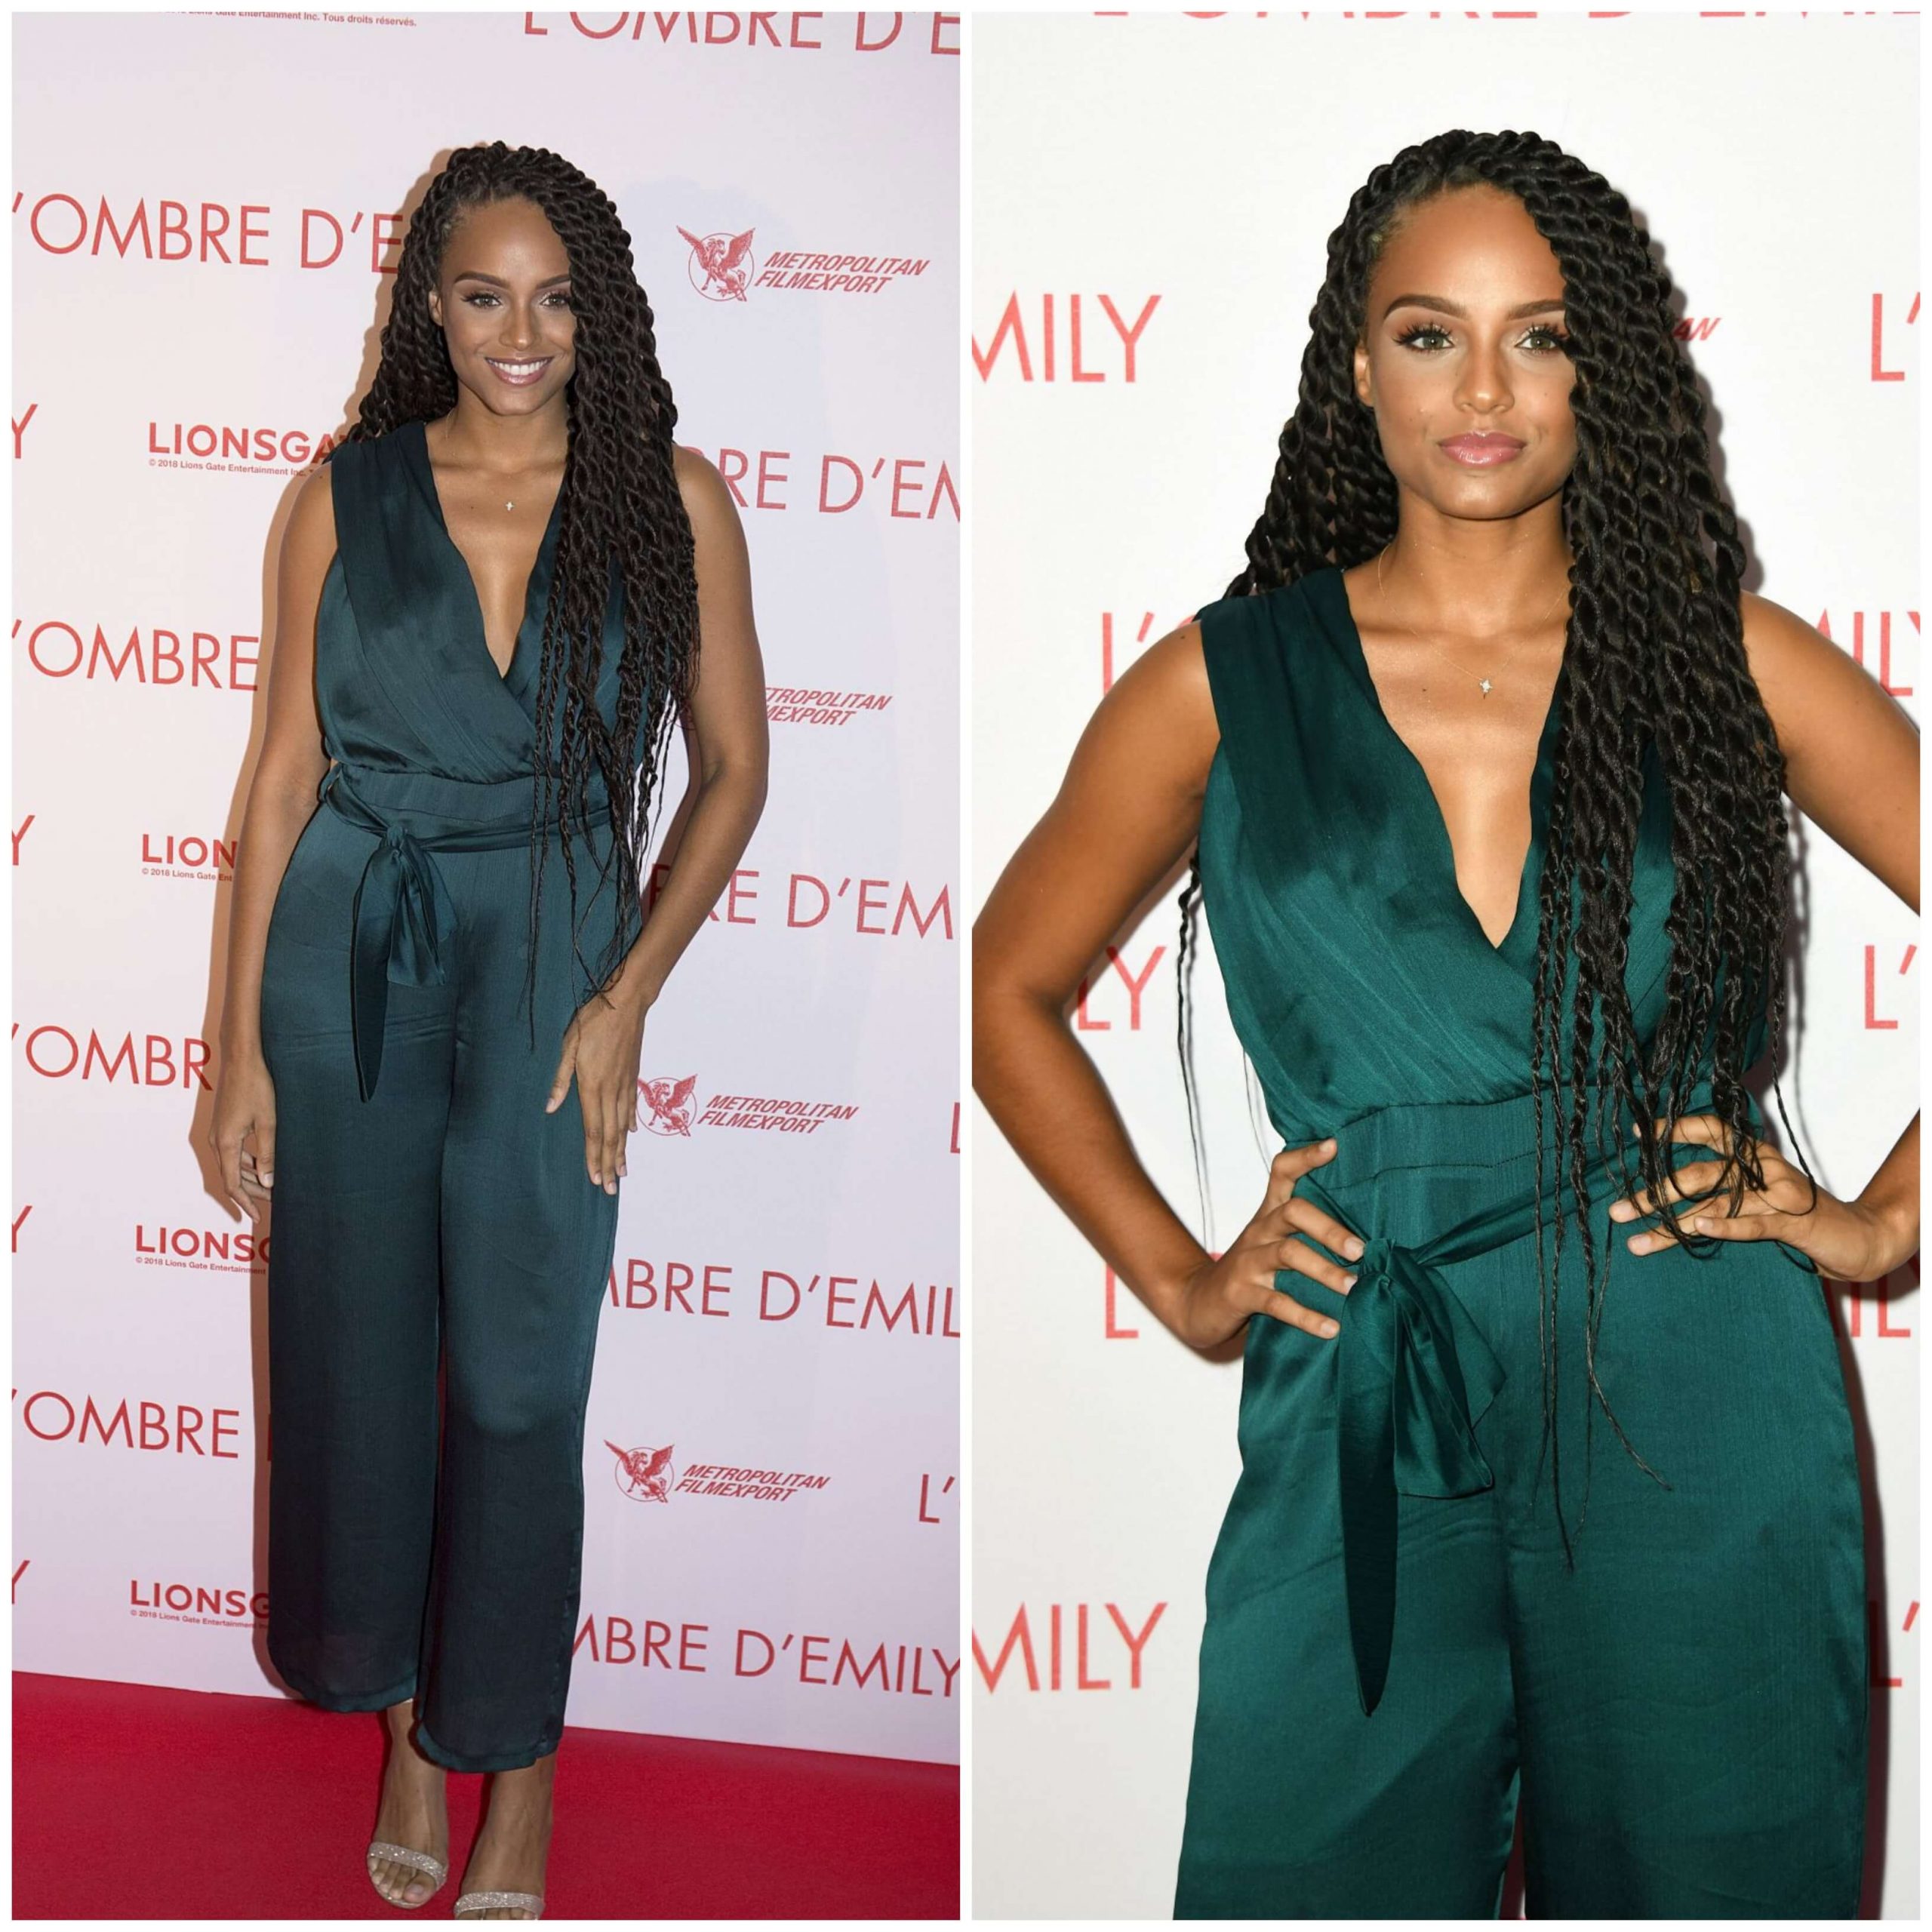 Alicia Aylies – Green Sleeveless Jumpsuits  - “A Simple Favor” Premiere in Paris